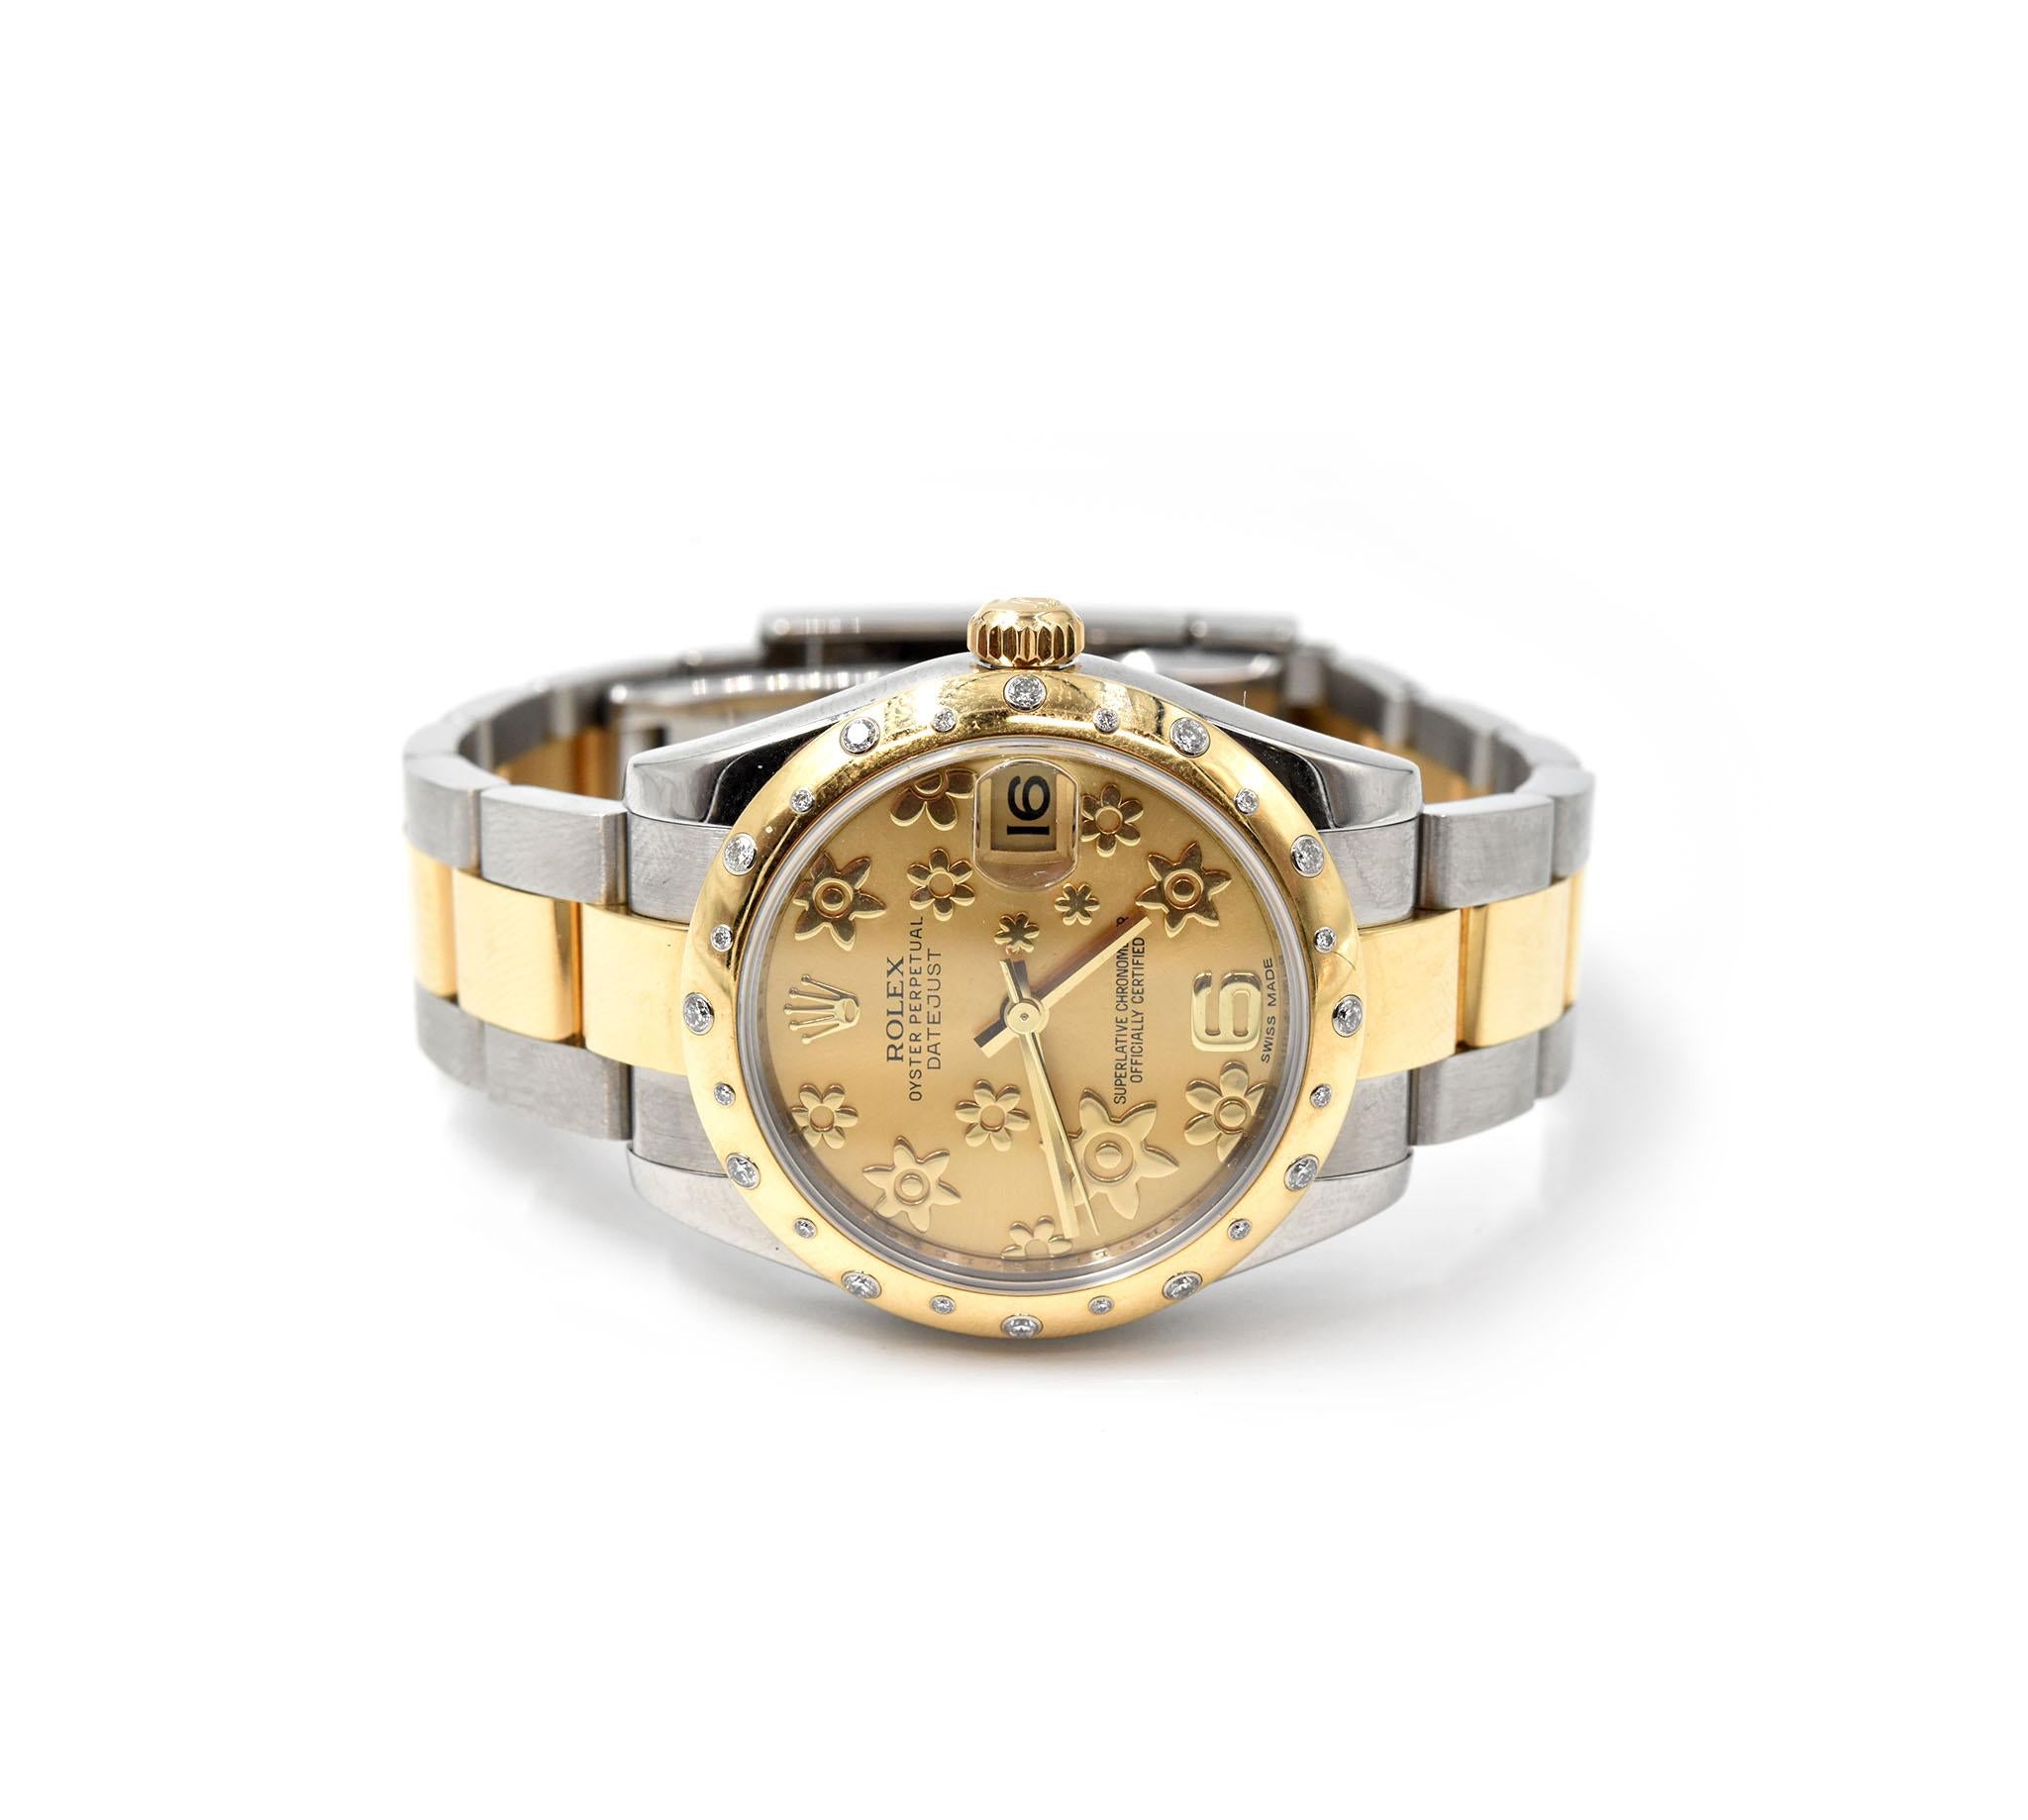 Movement: automatic
Function: hours, minutes, seconds, date
Case: 31mm stainless steel case with 18k yellow gold diamond bezel set with 24 sprinkled diamonds, inner reflector ring engraved with serial number 
Band: stainless steel and 18k yellow